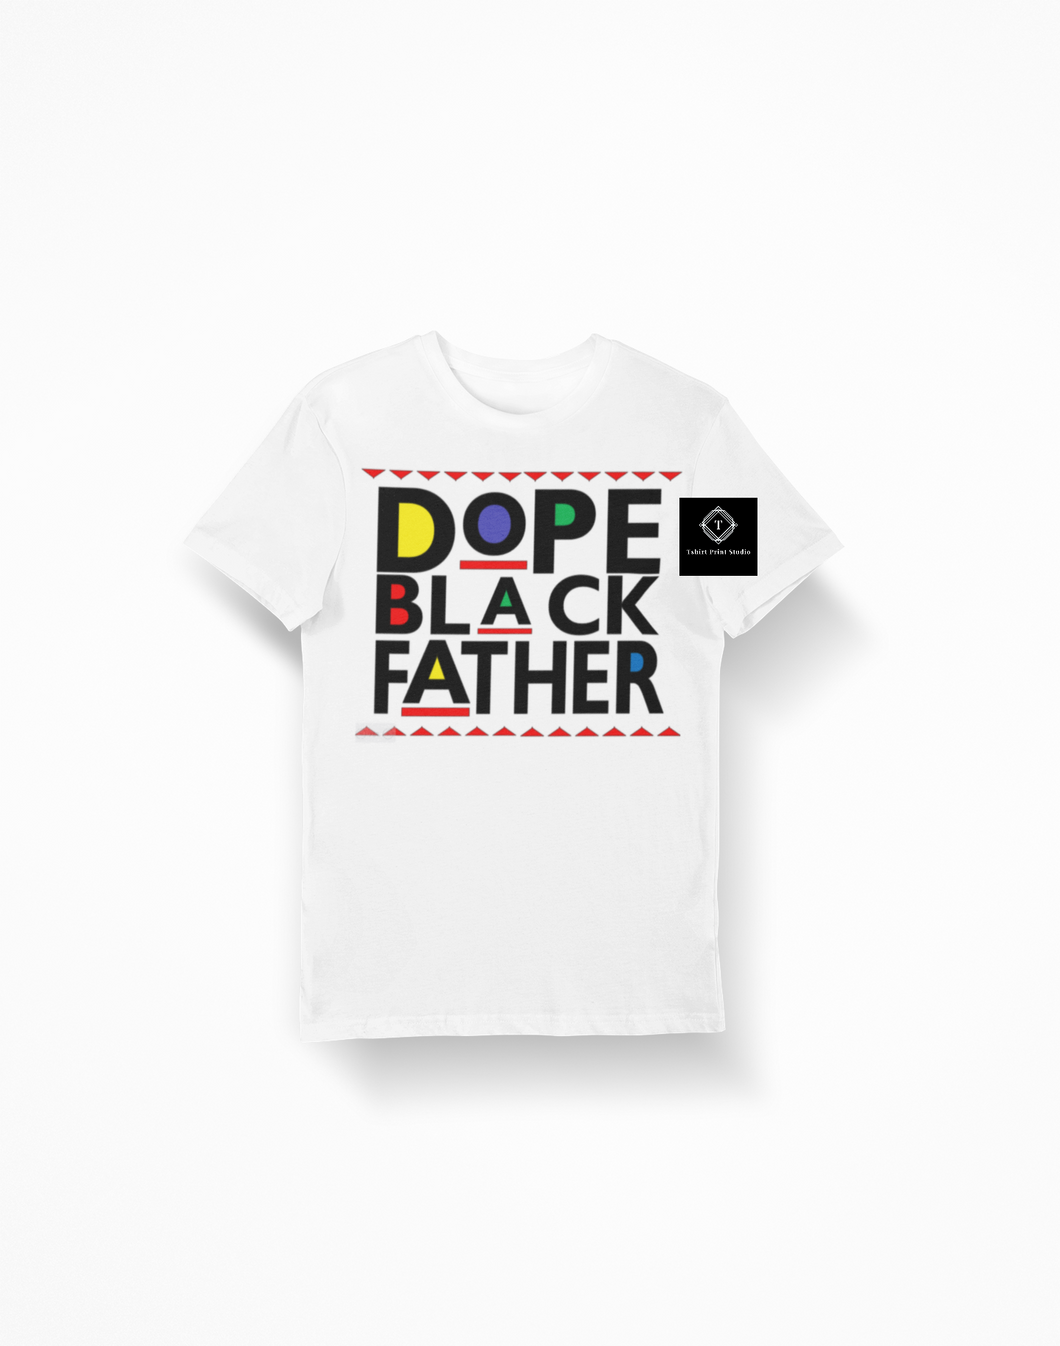 DOPE BLACK FATHER